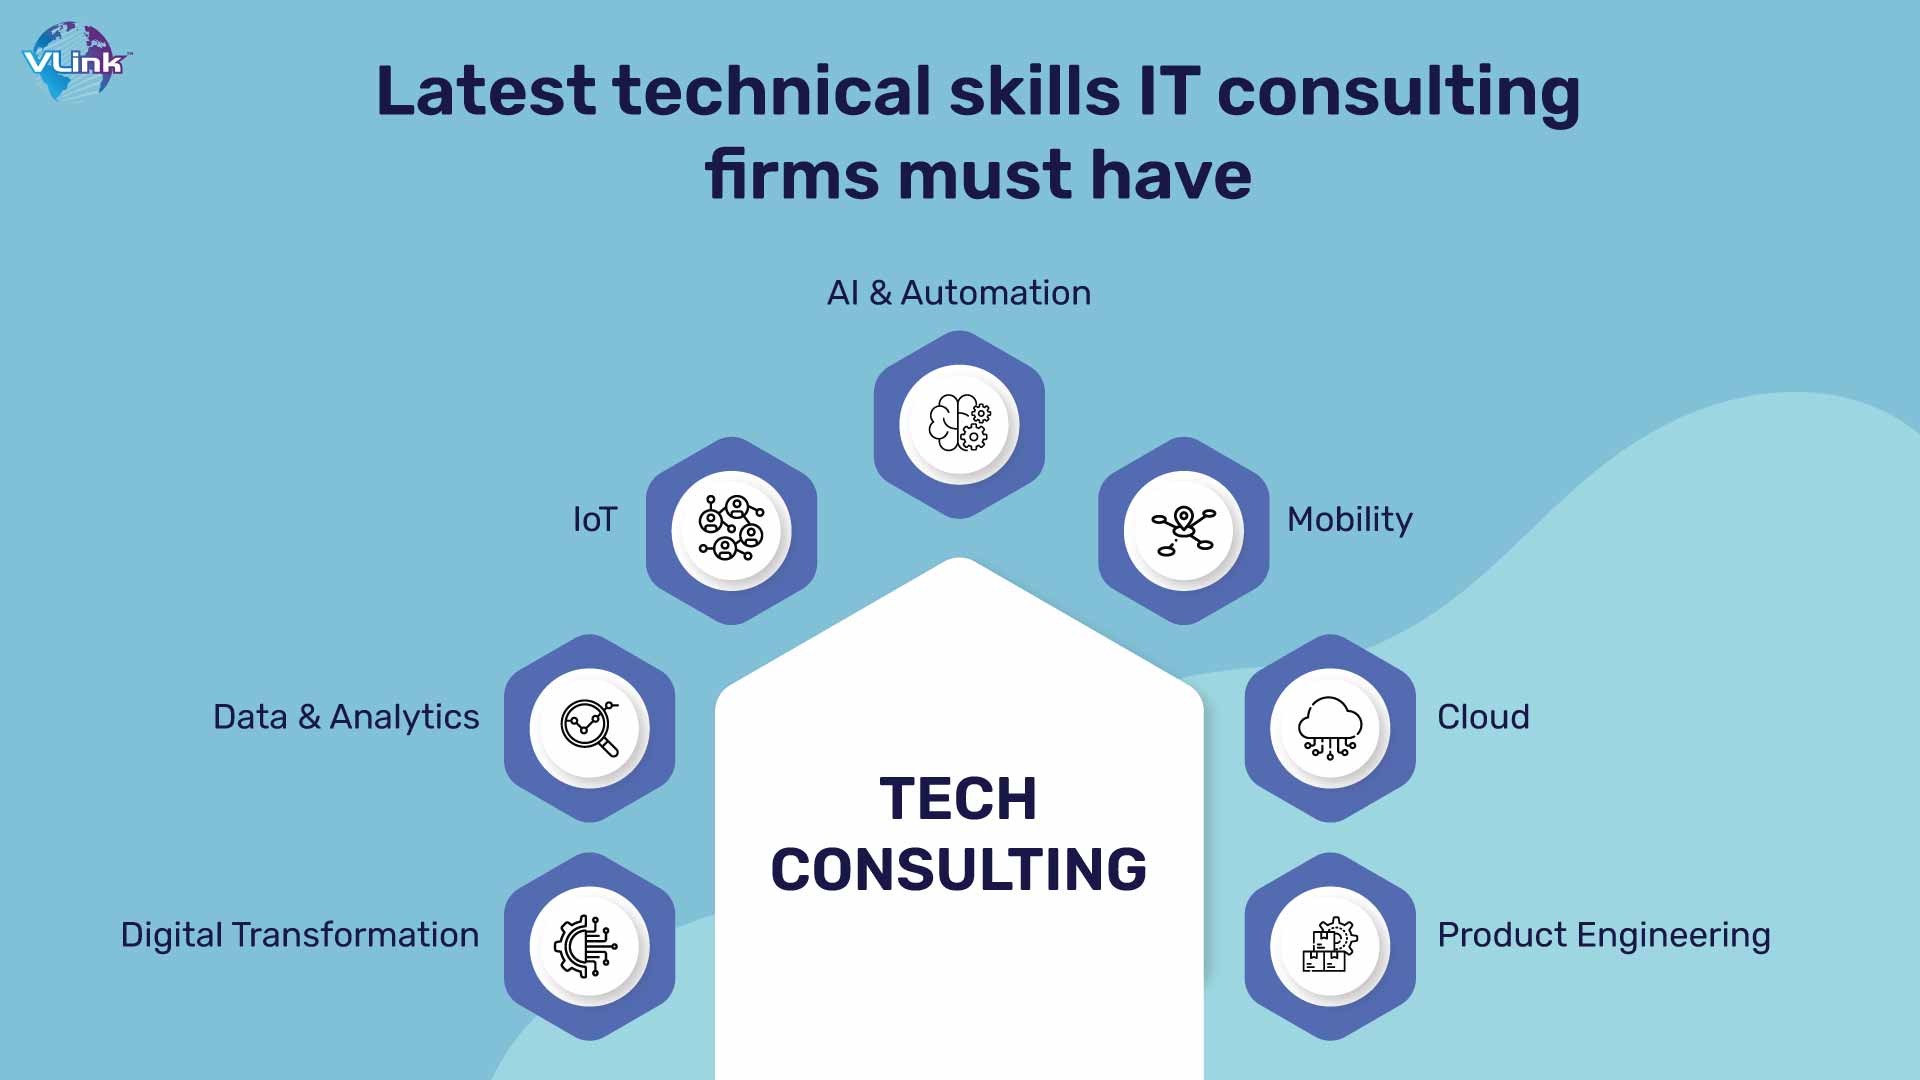 Latest technical skills IT consulting firms must have